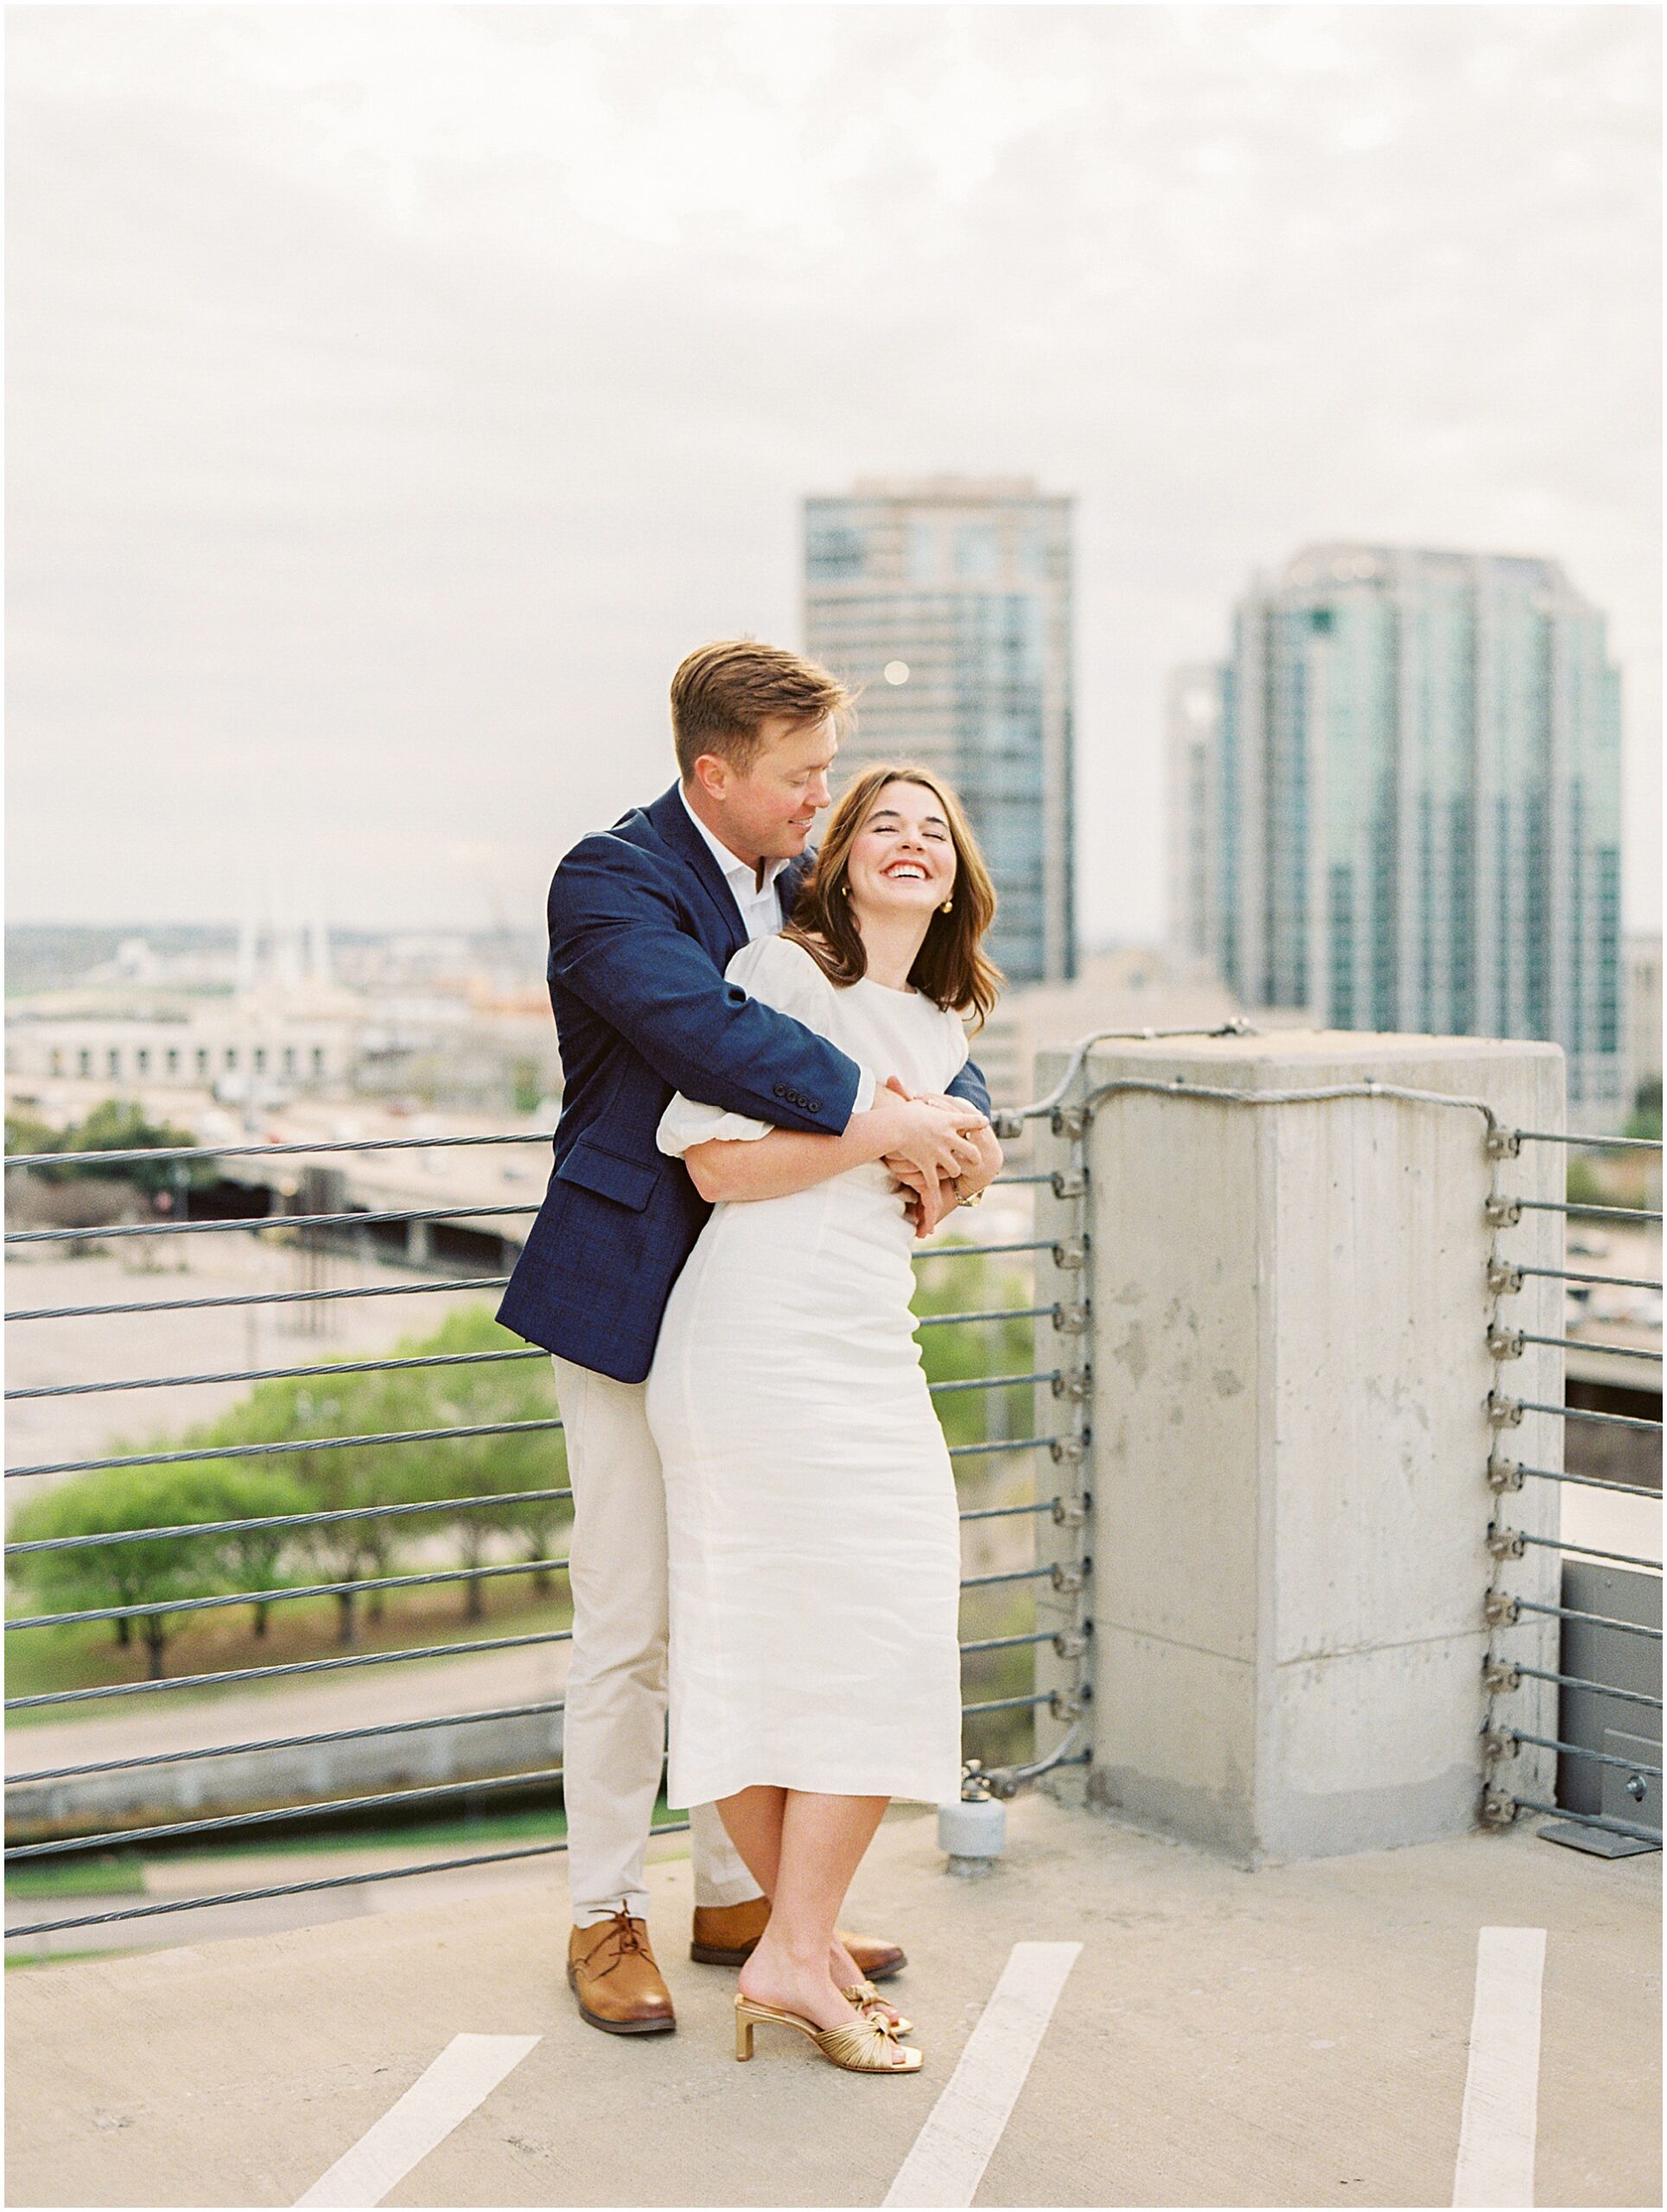 Love on the Rooftop: Catherine and Jack's Cityscape Embrace in Dallas